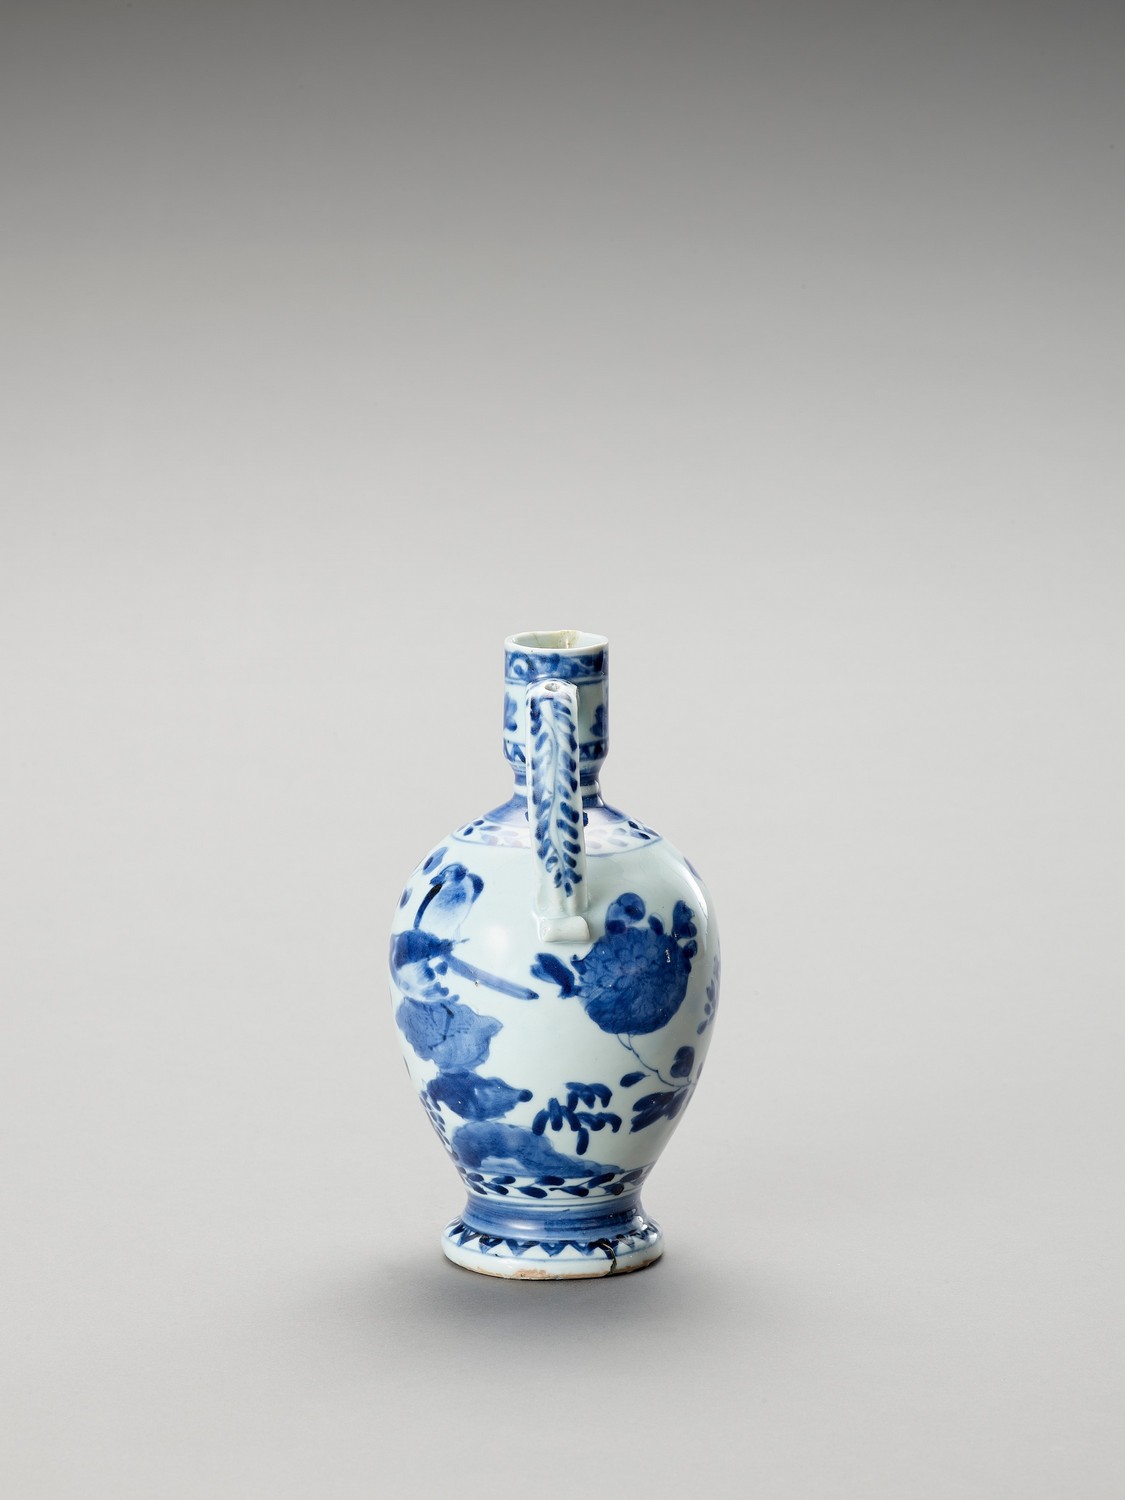 A BLUE AND WHITE PORCELAIN JUG - Image 4 of 7